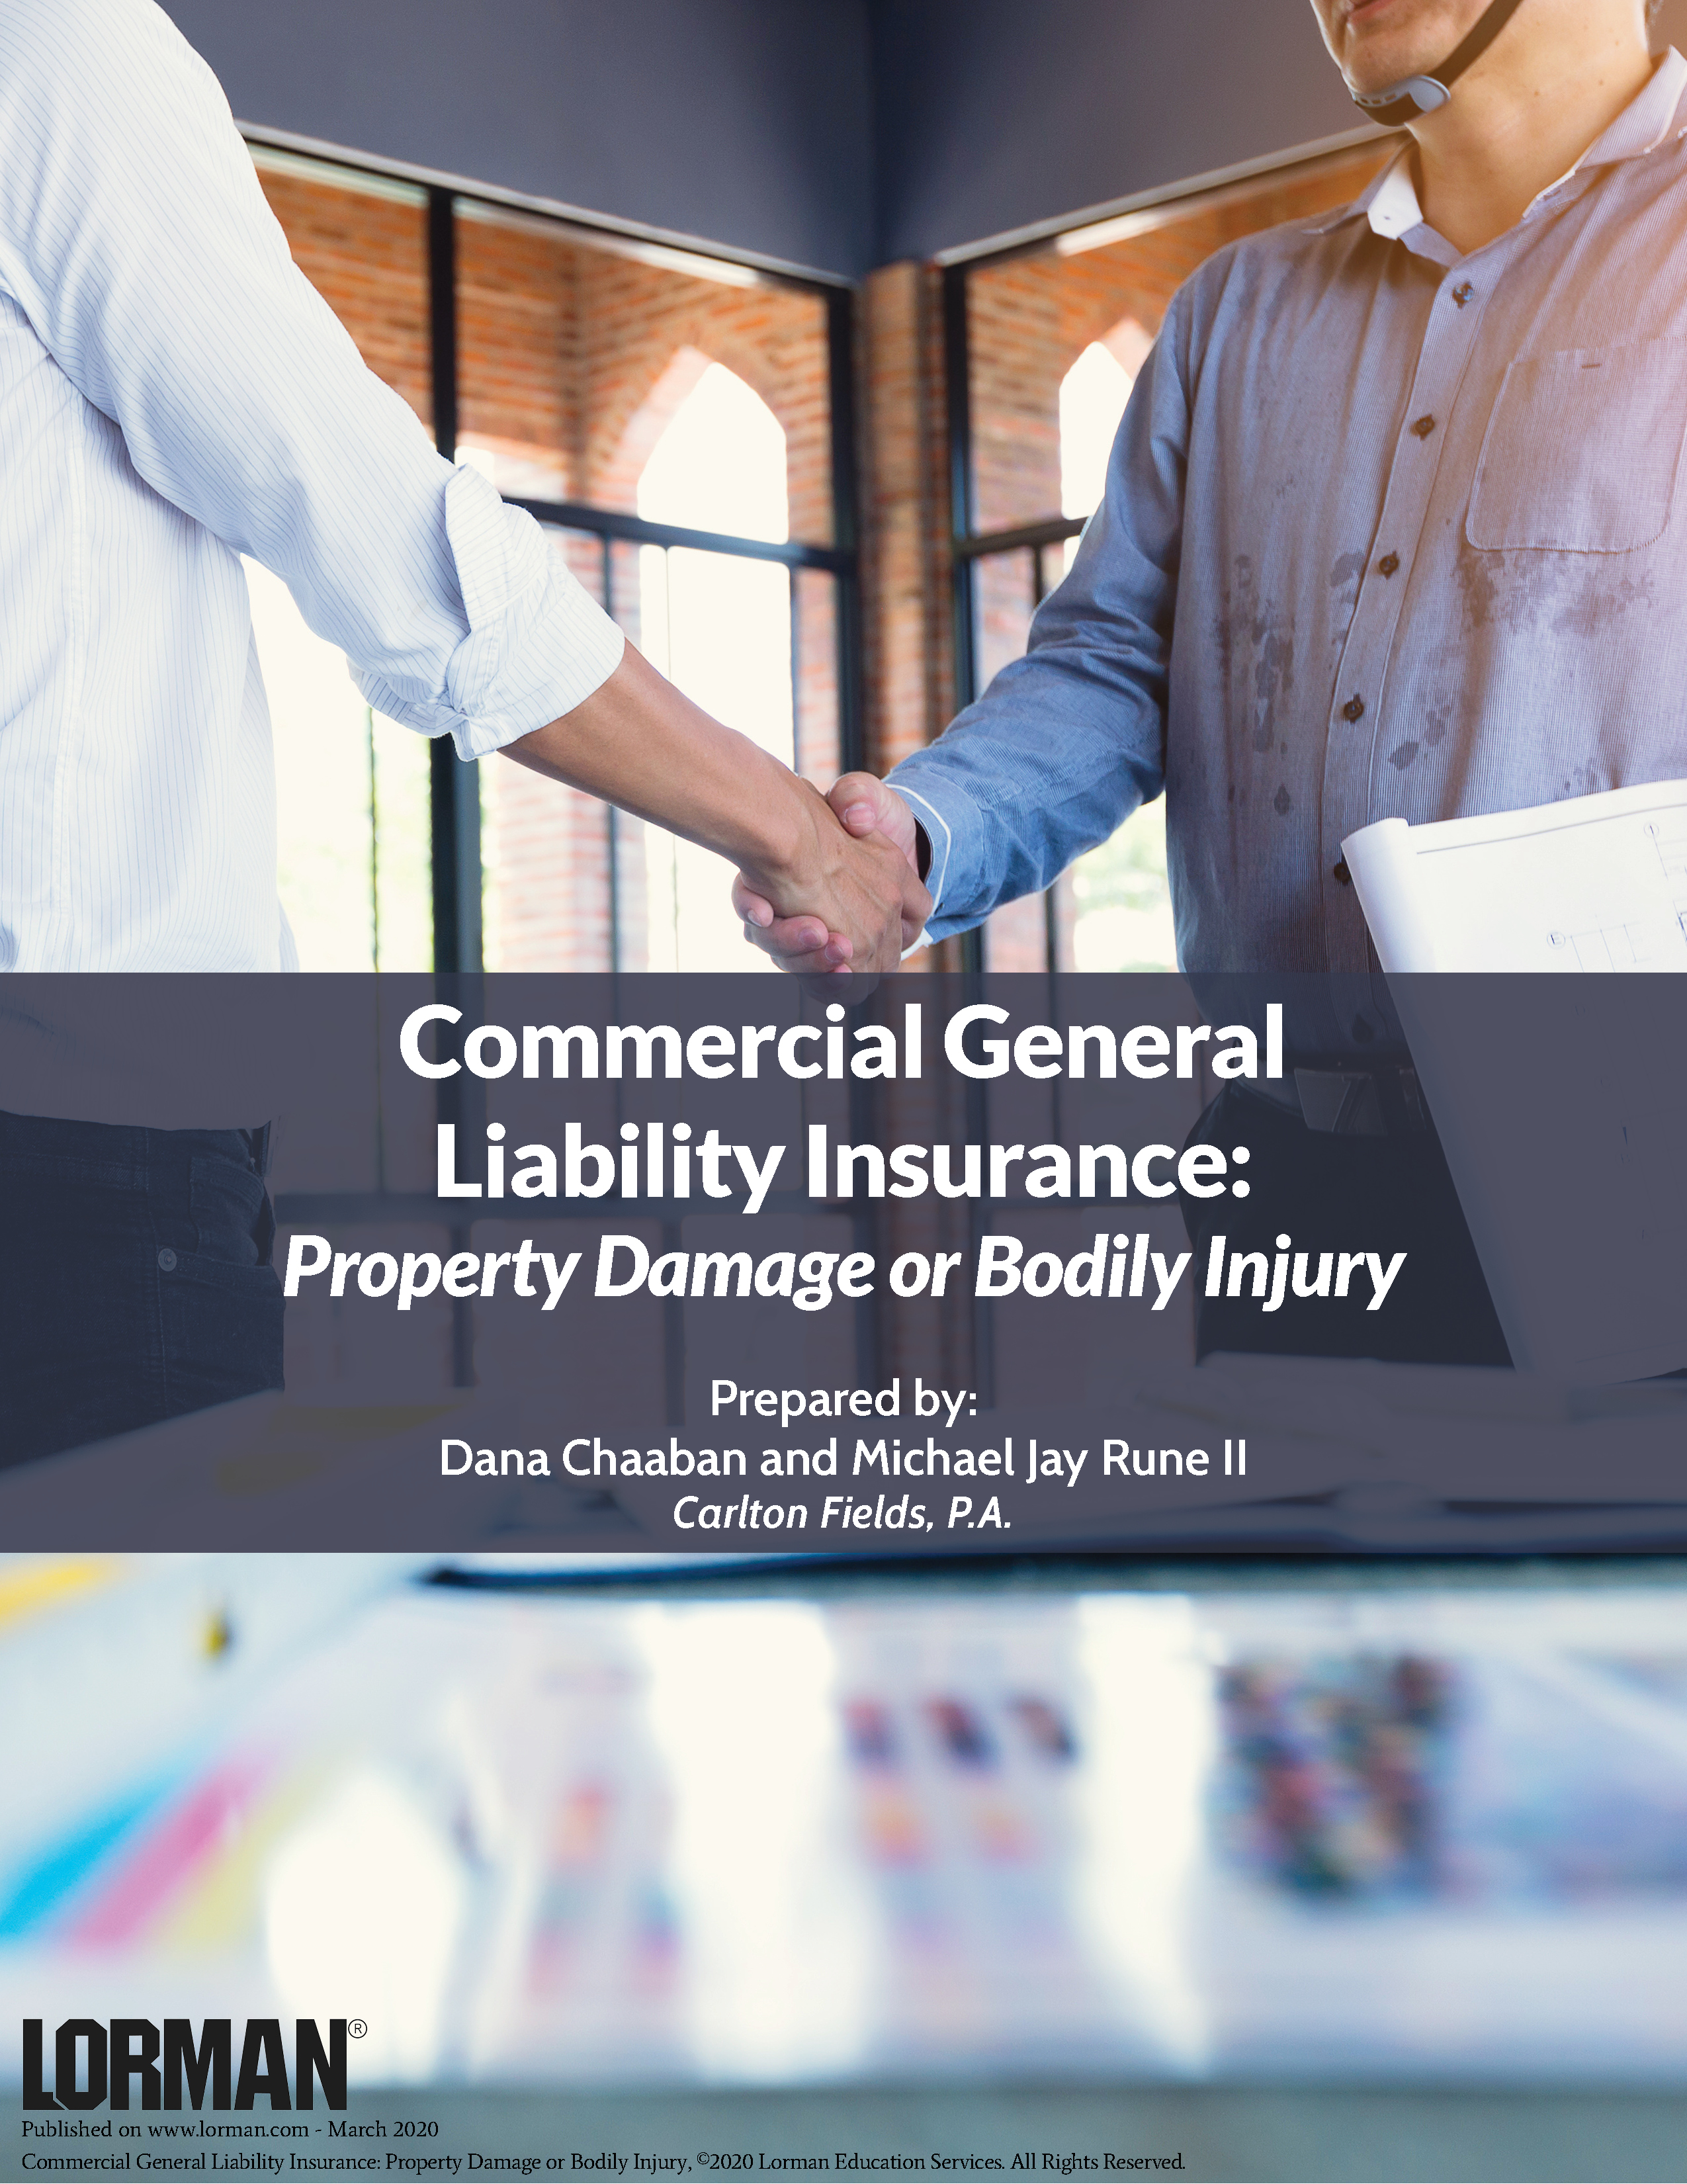 Commercial General Liability Insurance: Property Damage or Bodily Injury